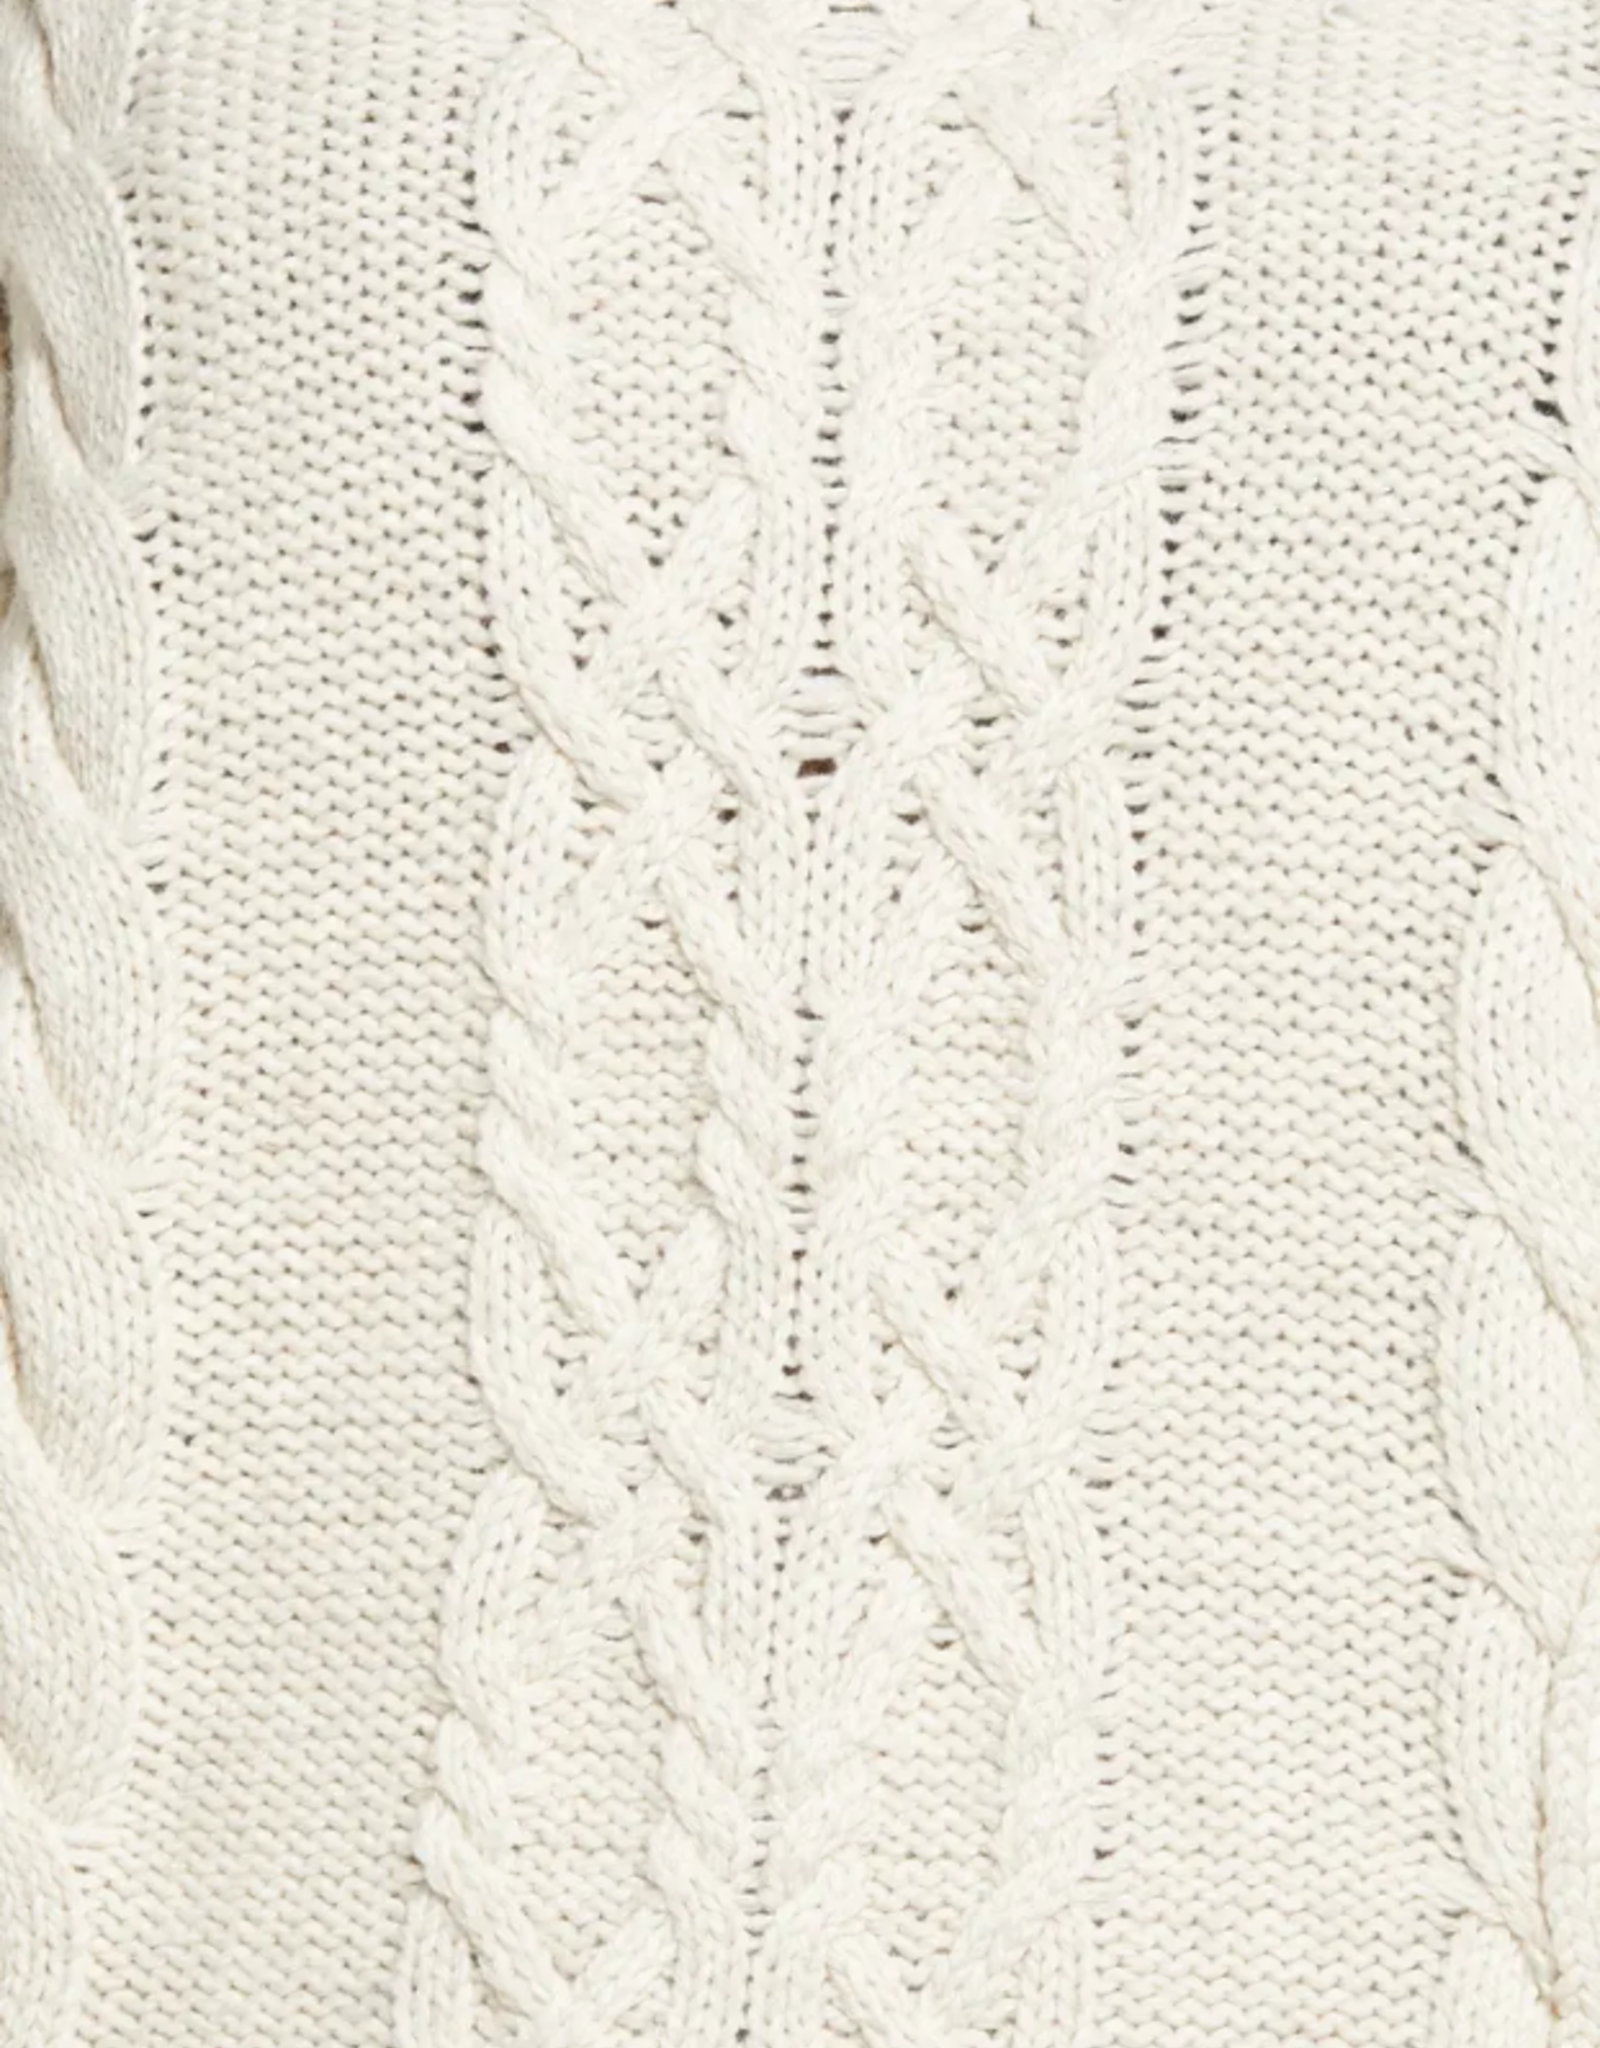 Leith Cable Knit Fringe Sweater